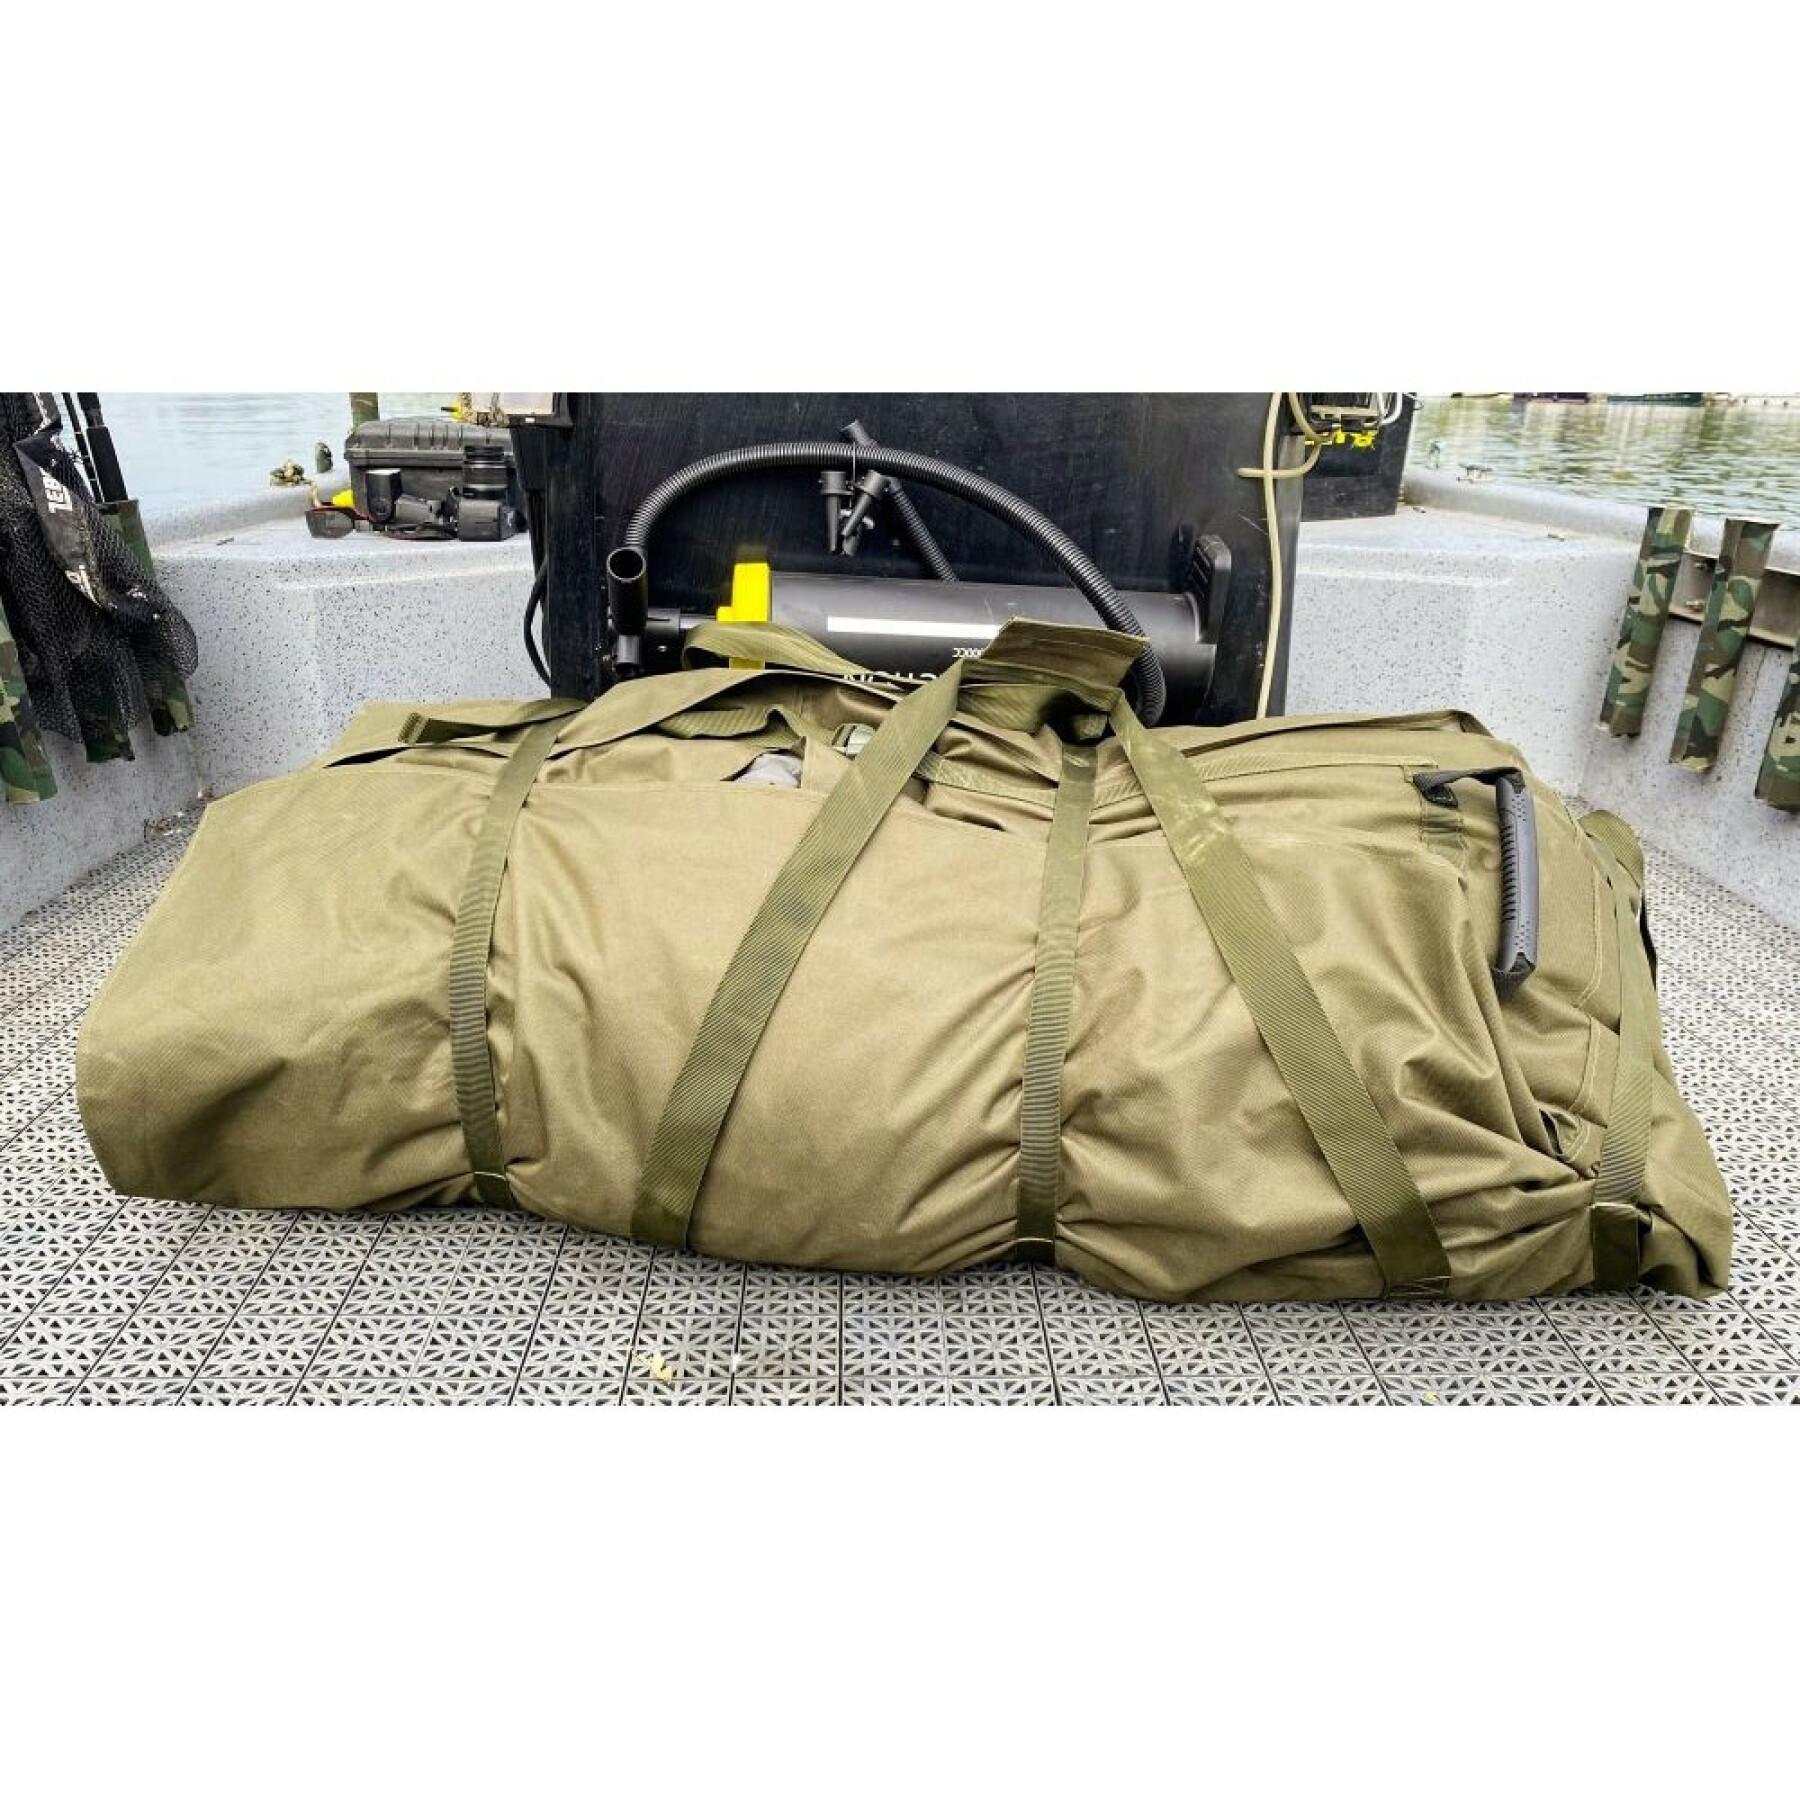 Boat tent Black Cat Airframe